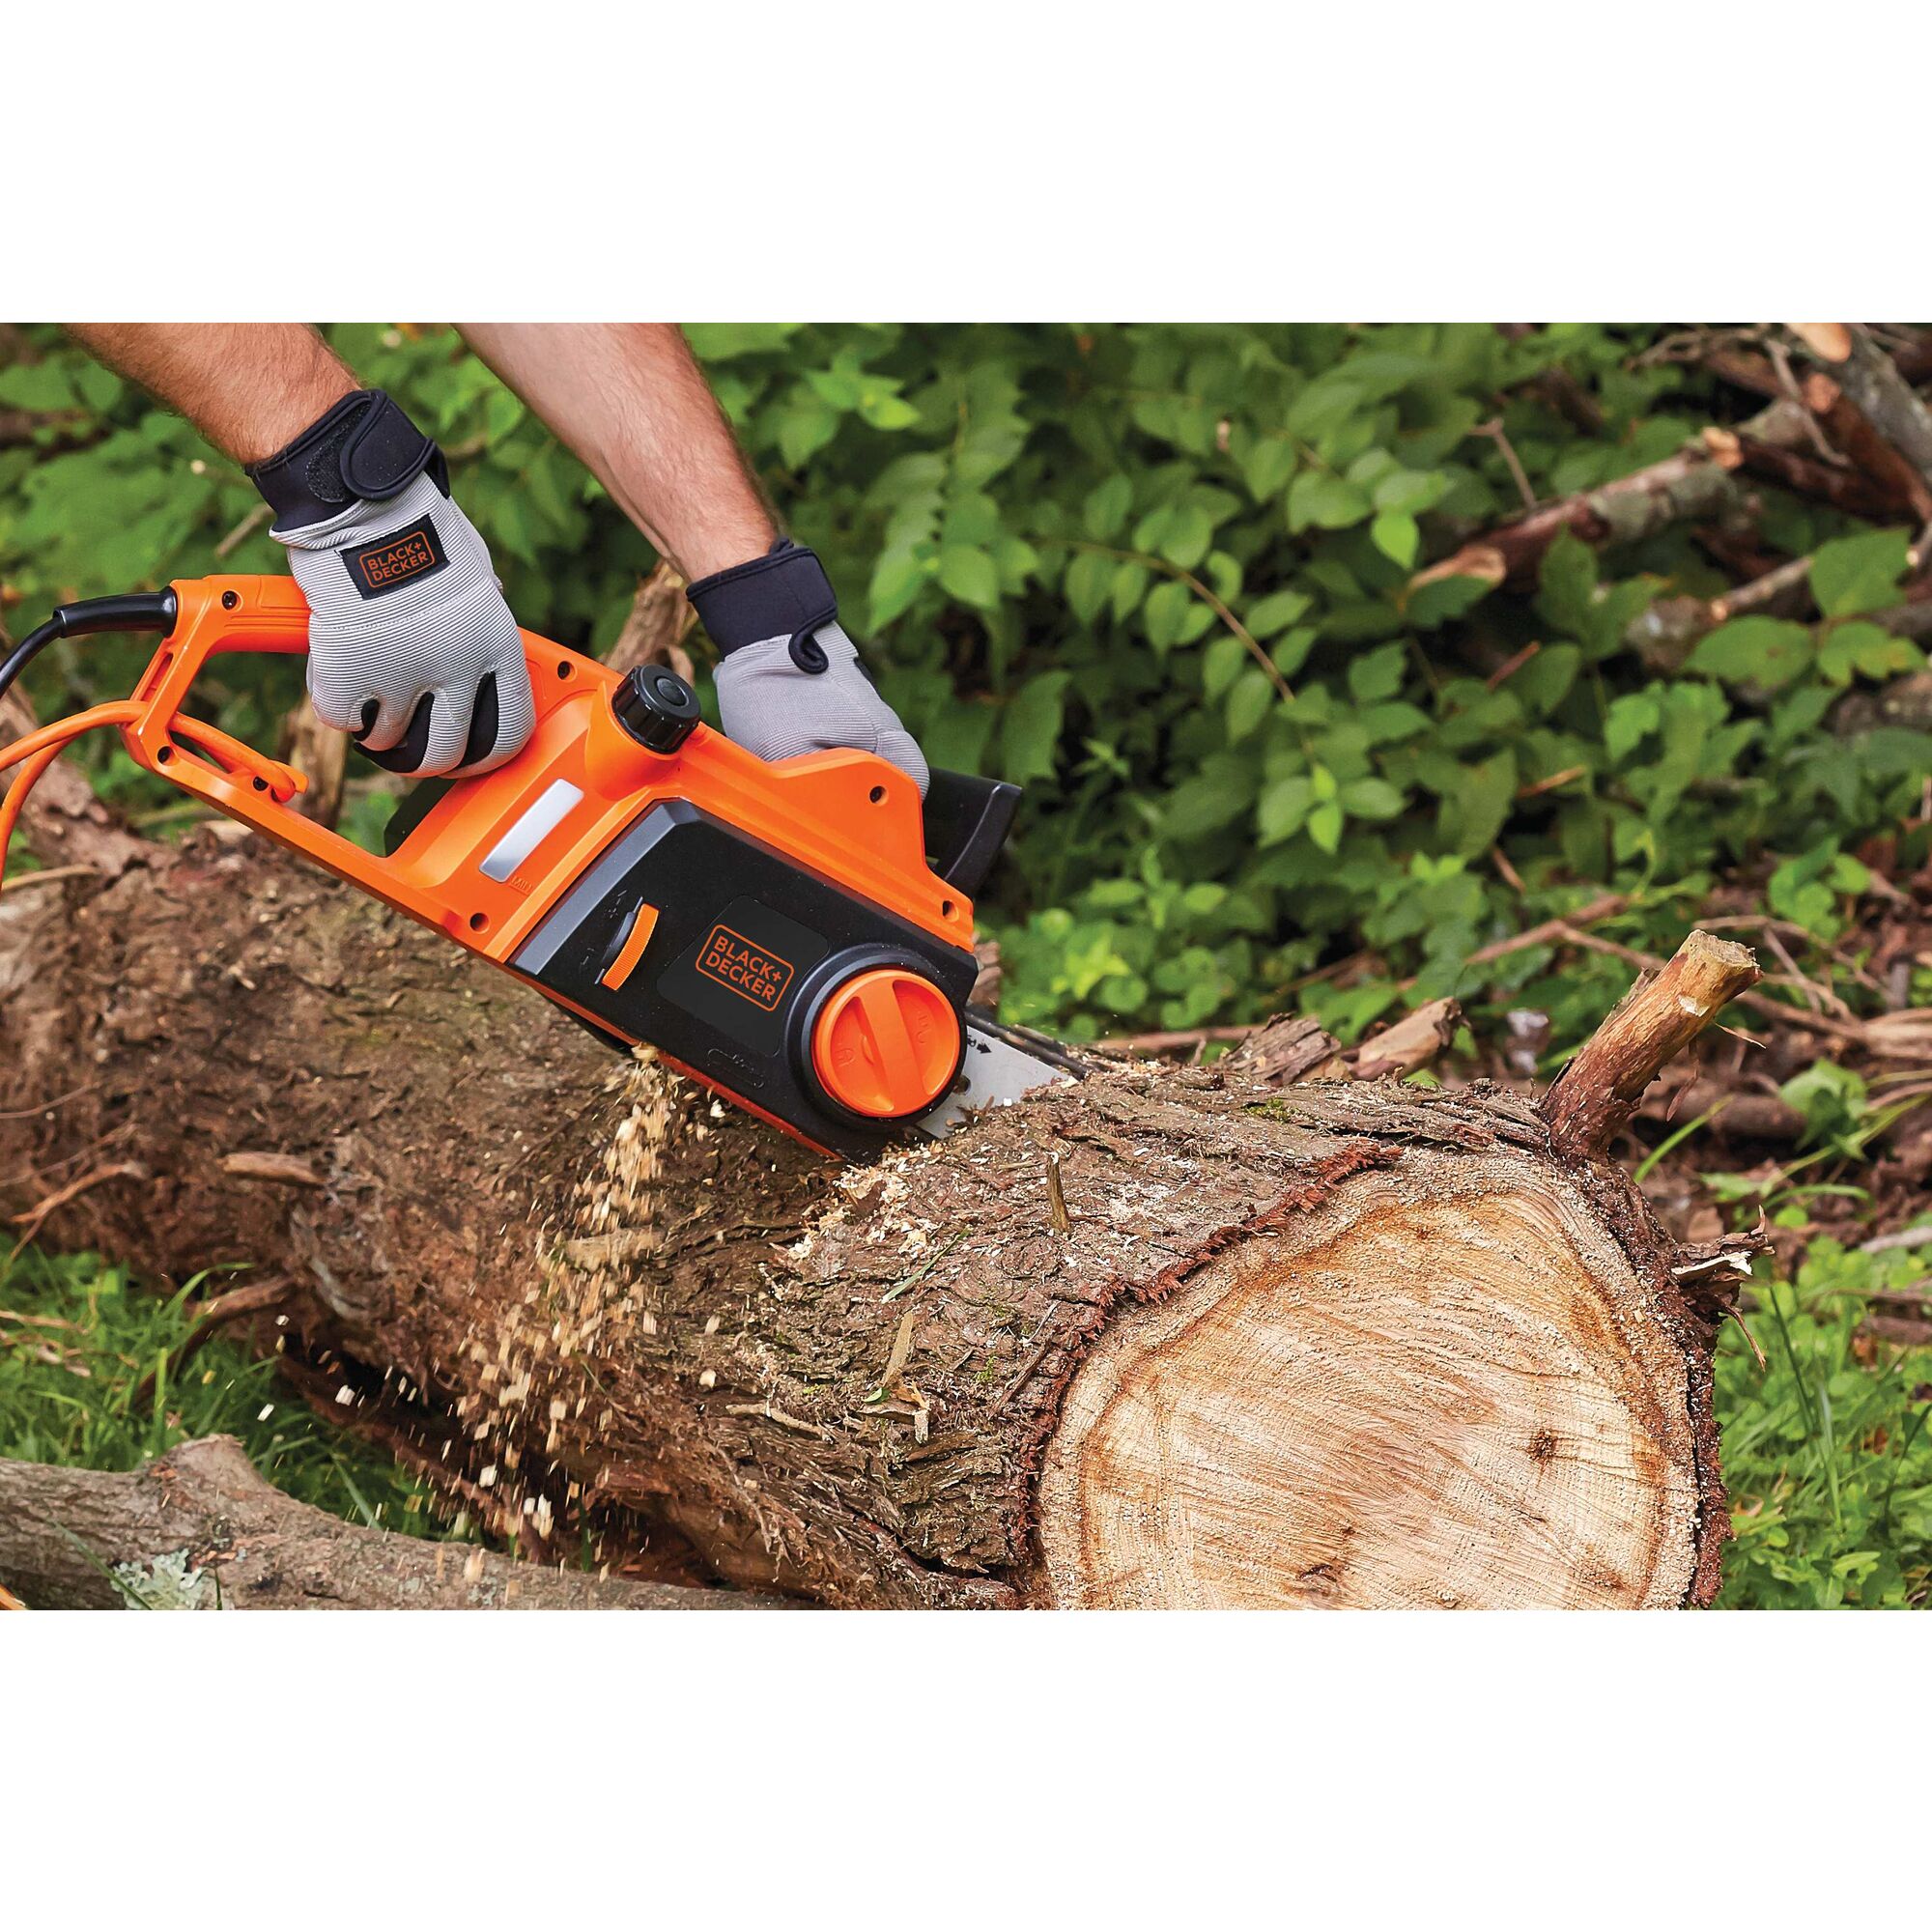 12 Ampere 16 inch chainsaw being used by a person to cut tree trunk.